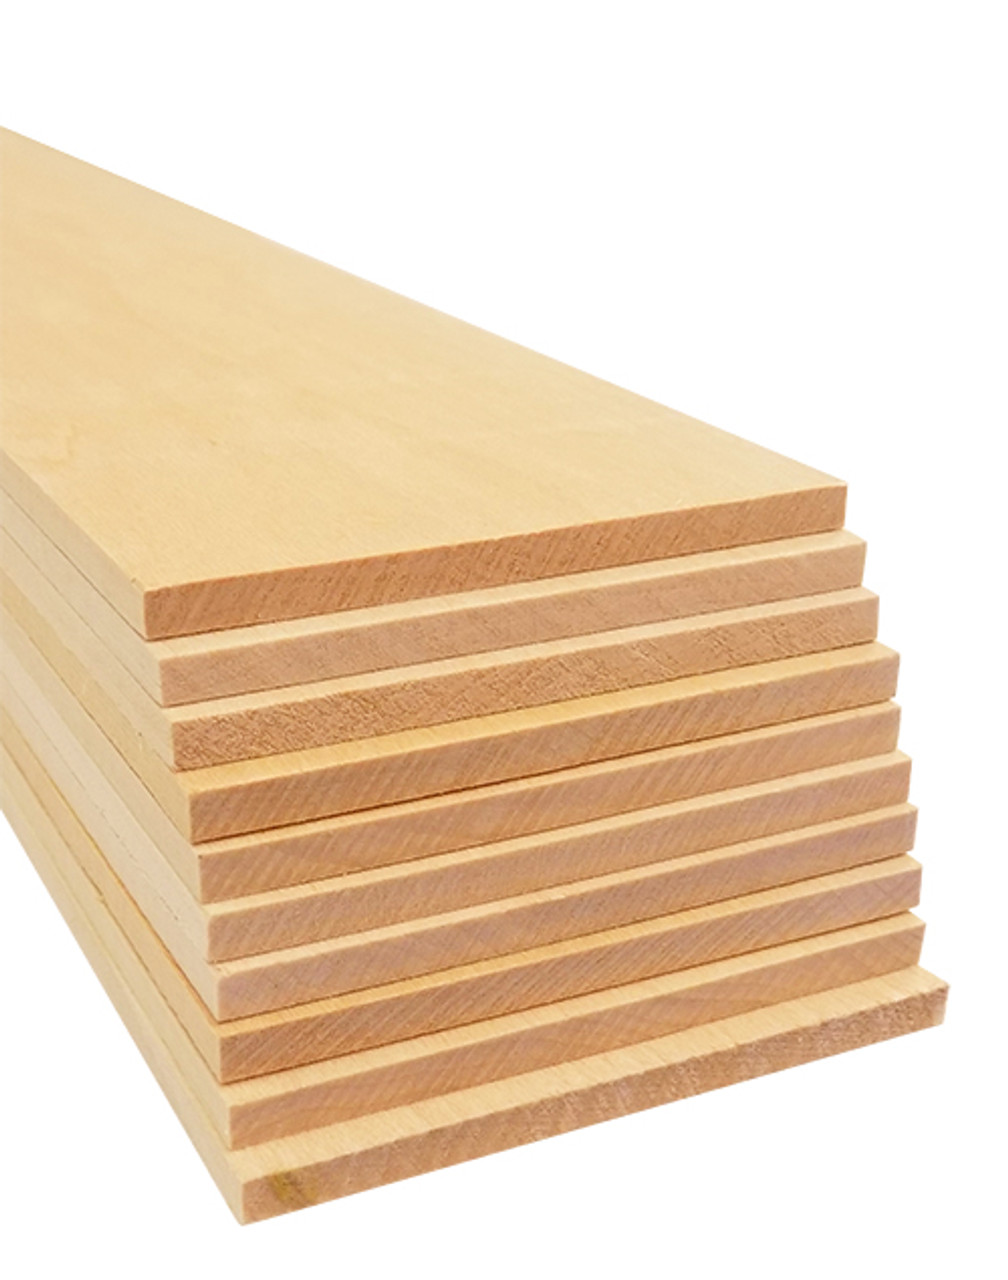 Midwest Basswood Sheets - 1/16-inch x 3-inch x 24-inch